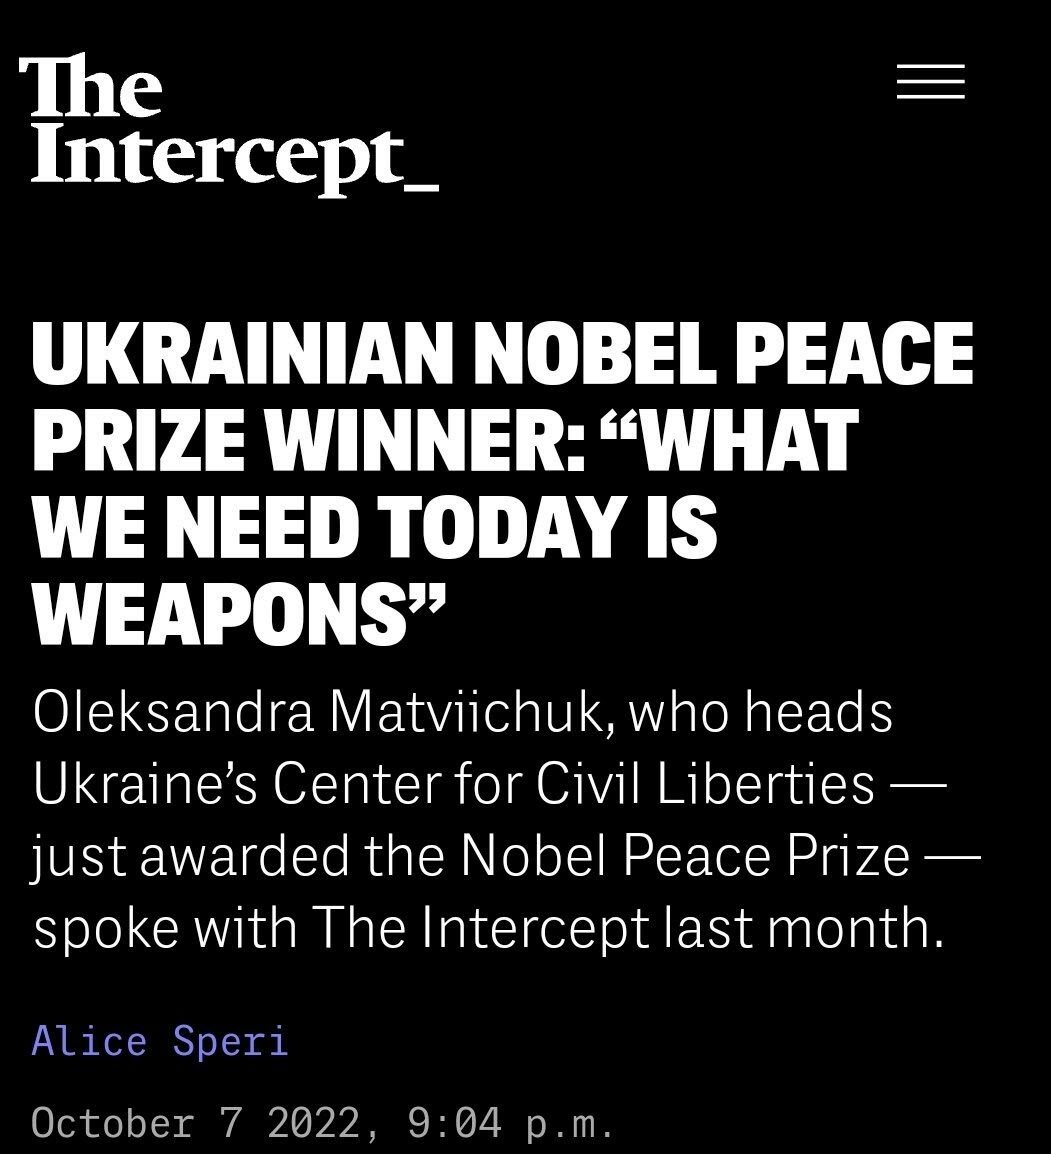 A headline from the Intercept highlighting that a Nobel Peace Prize winner from Ukraine wants more war.